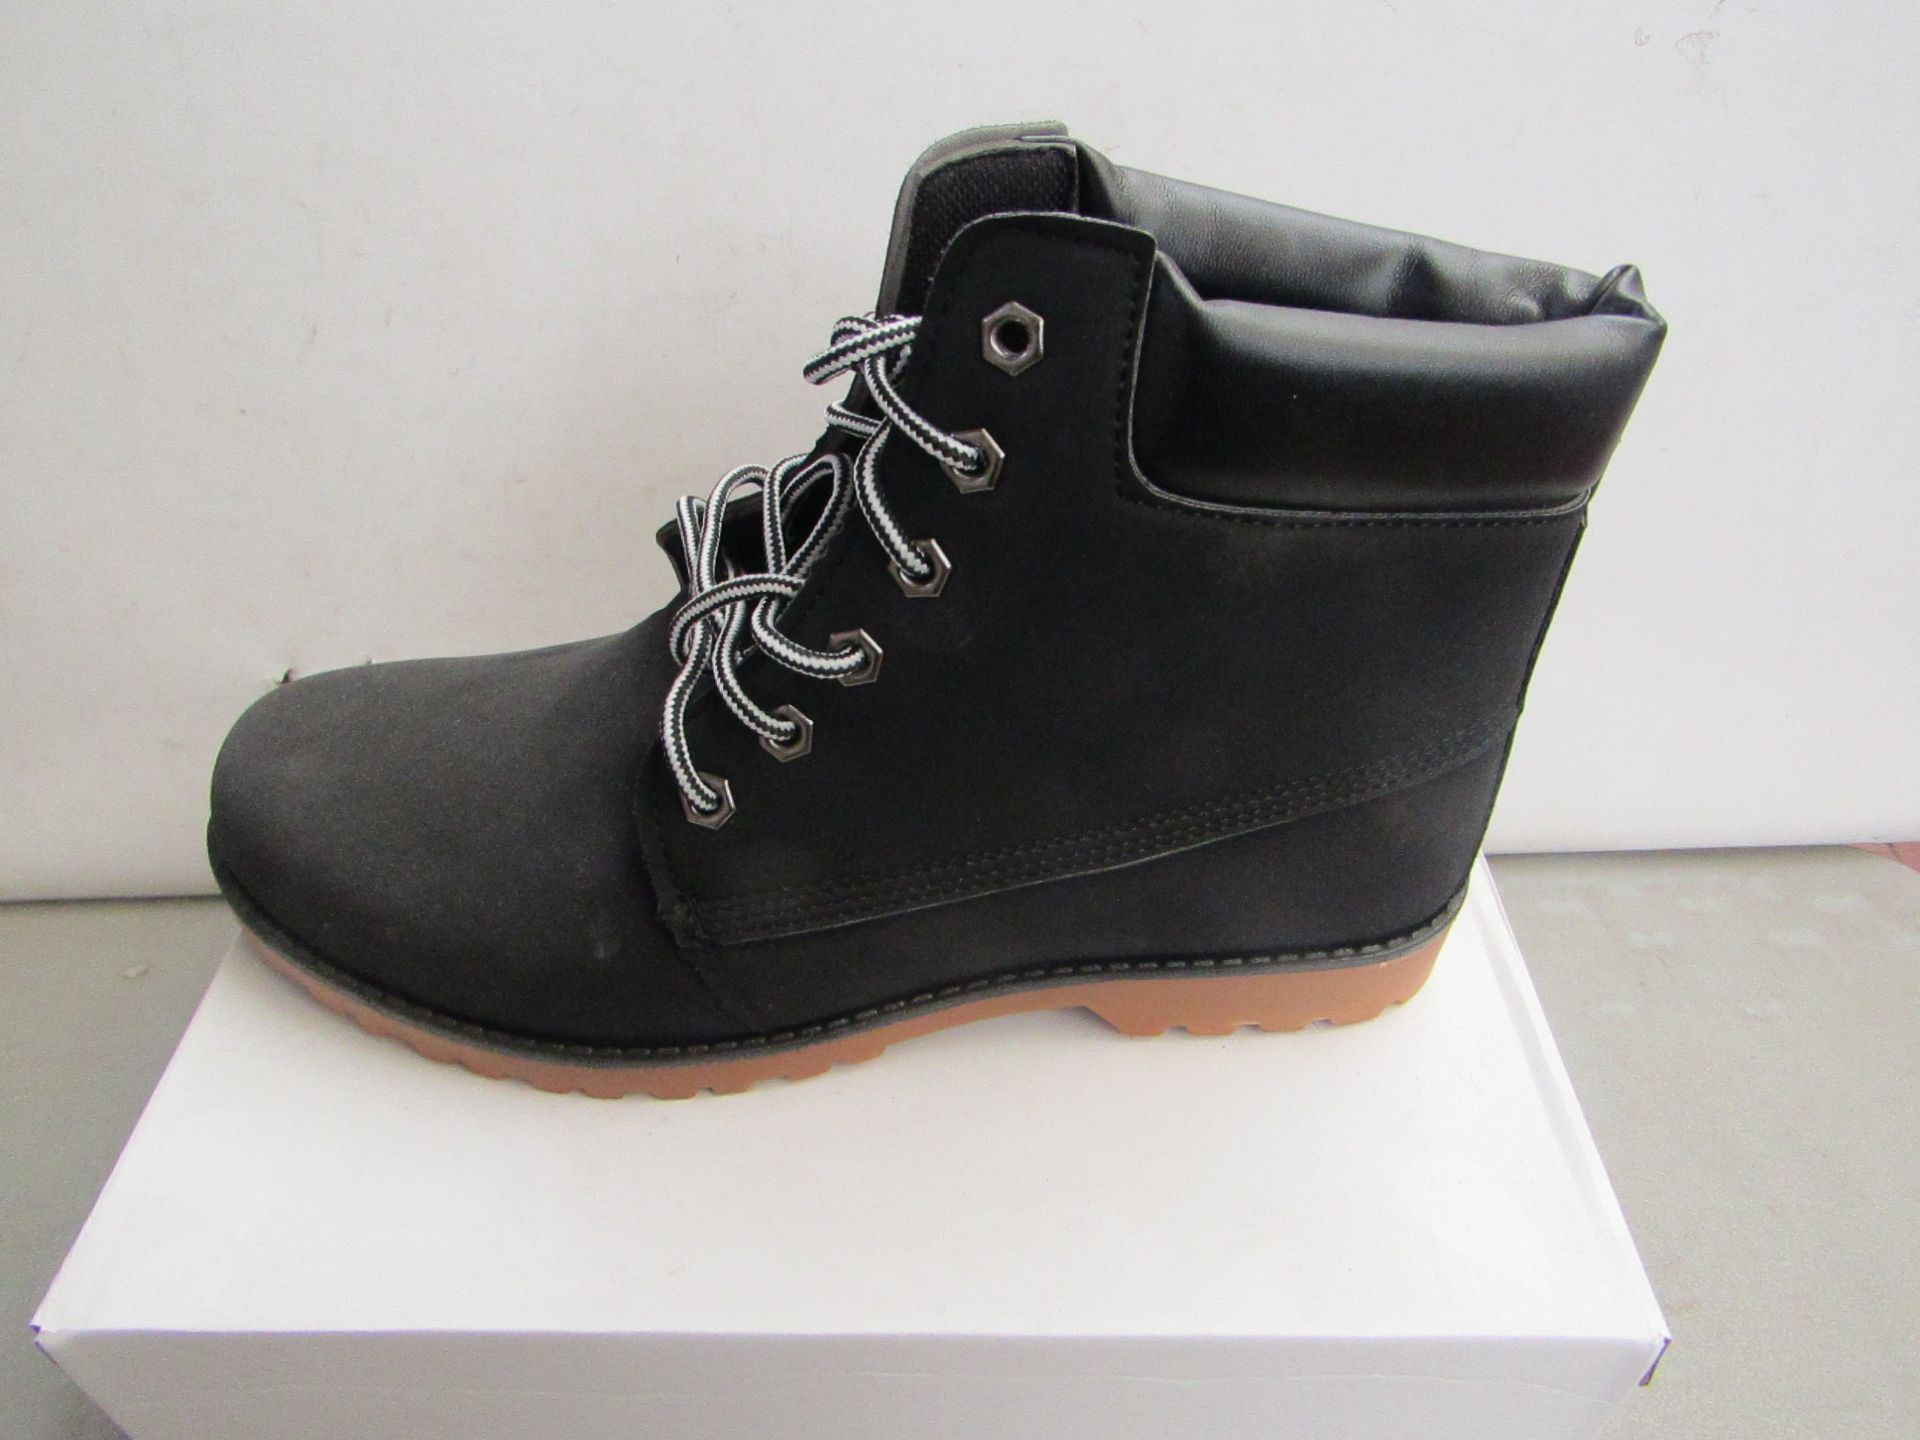 Black Fashion Boots size EU 41 new and boxed.